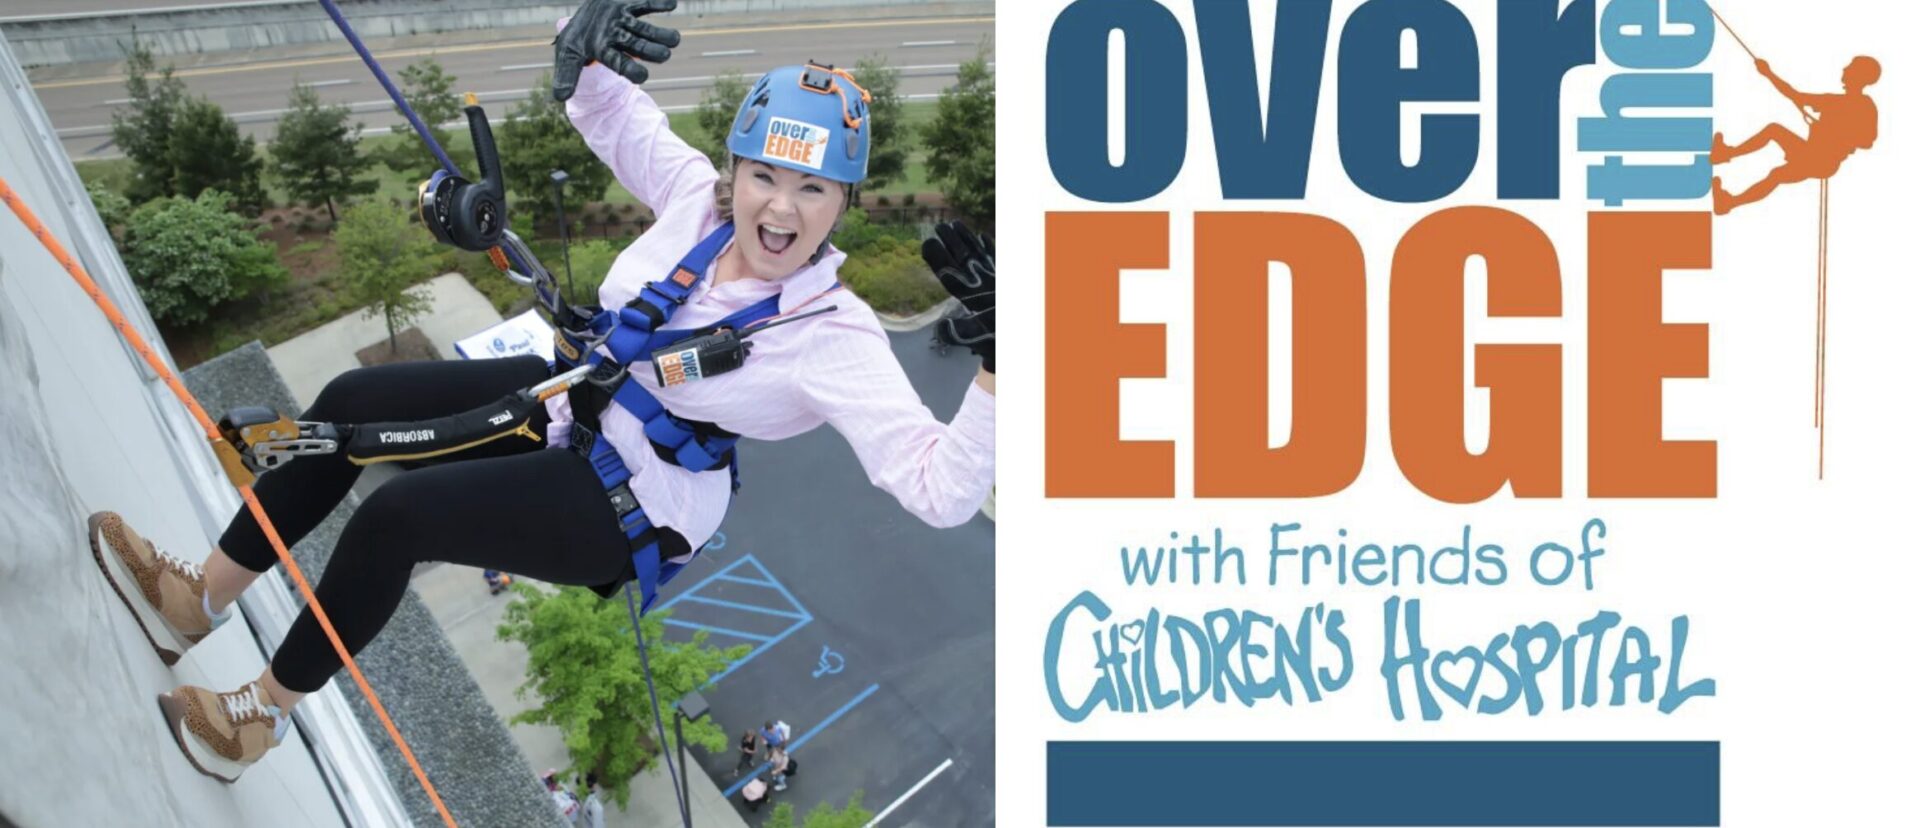 Over the Edge with Friends of Children’s Hospital